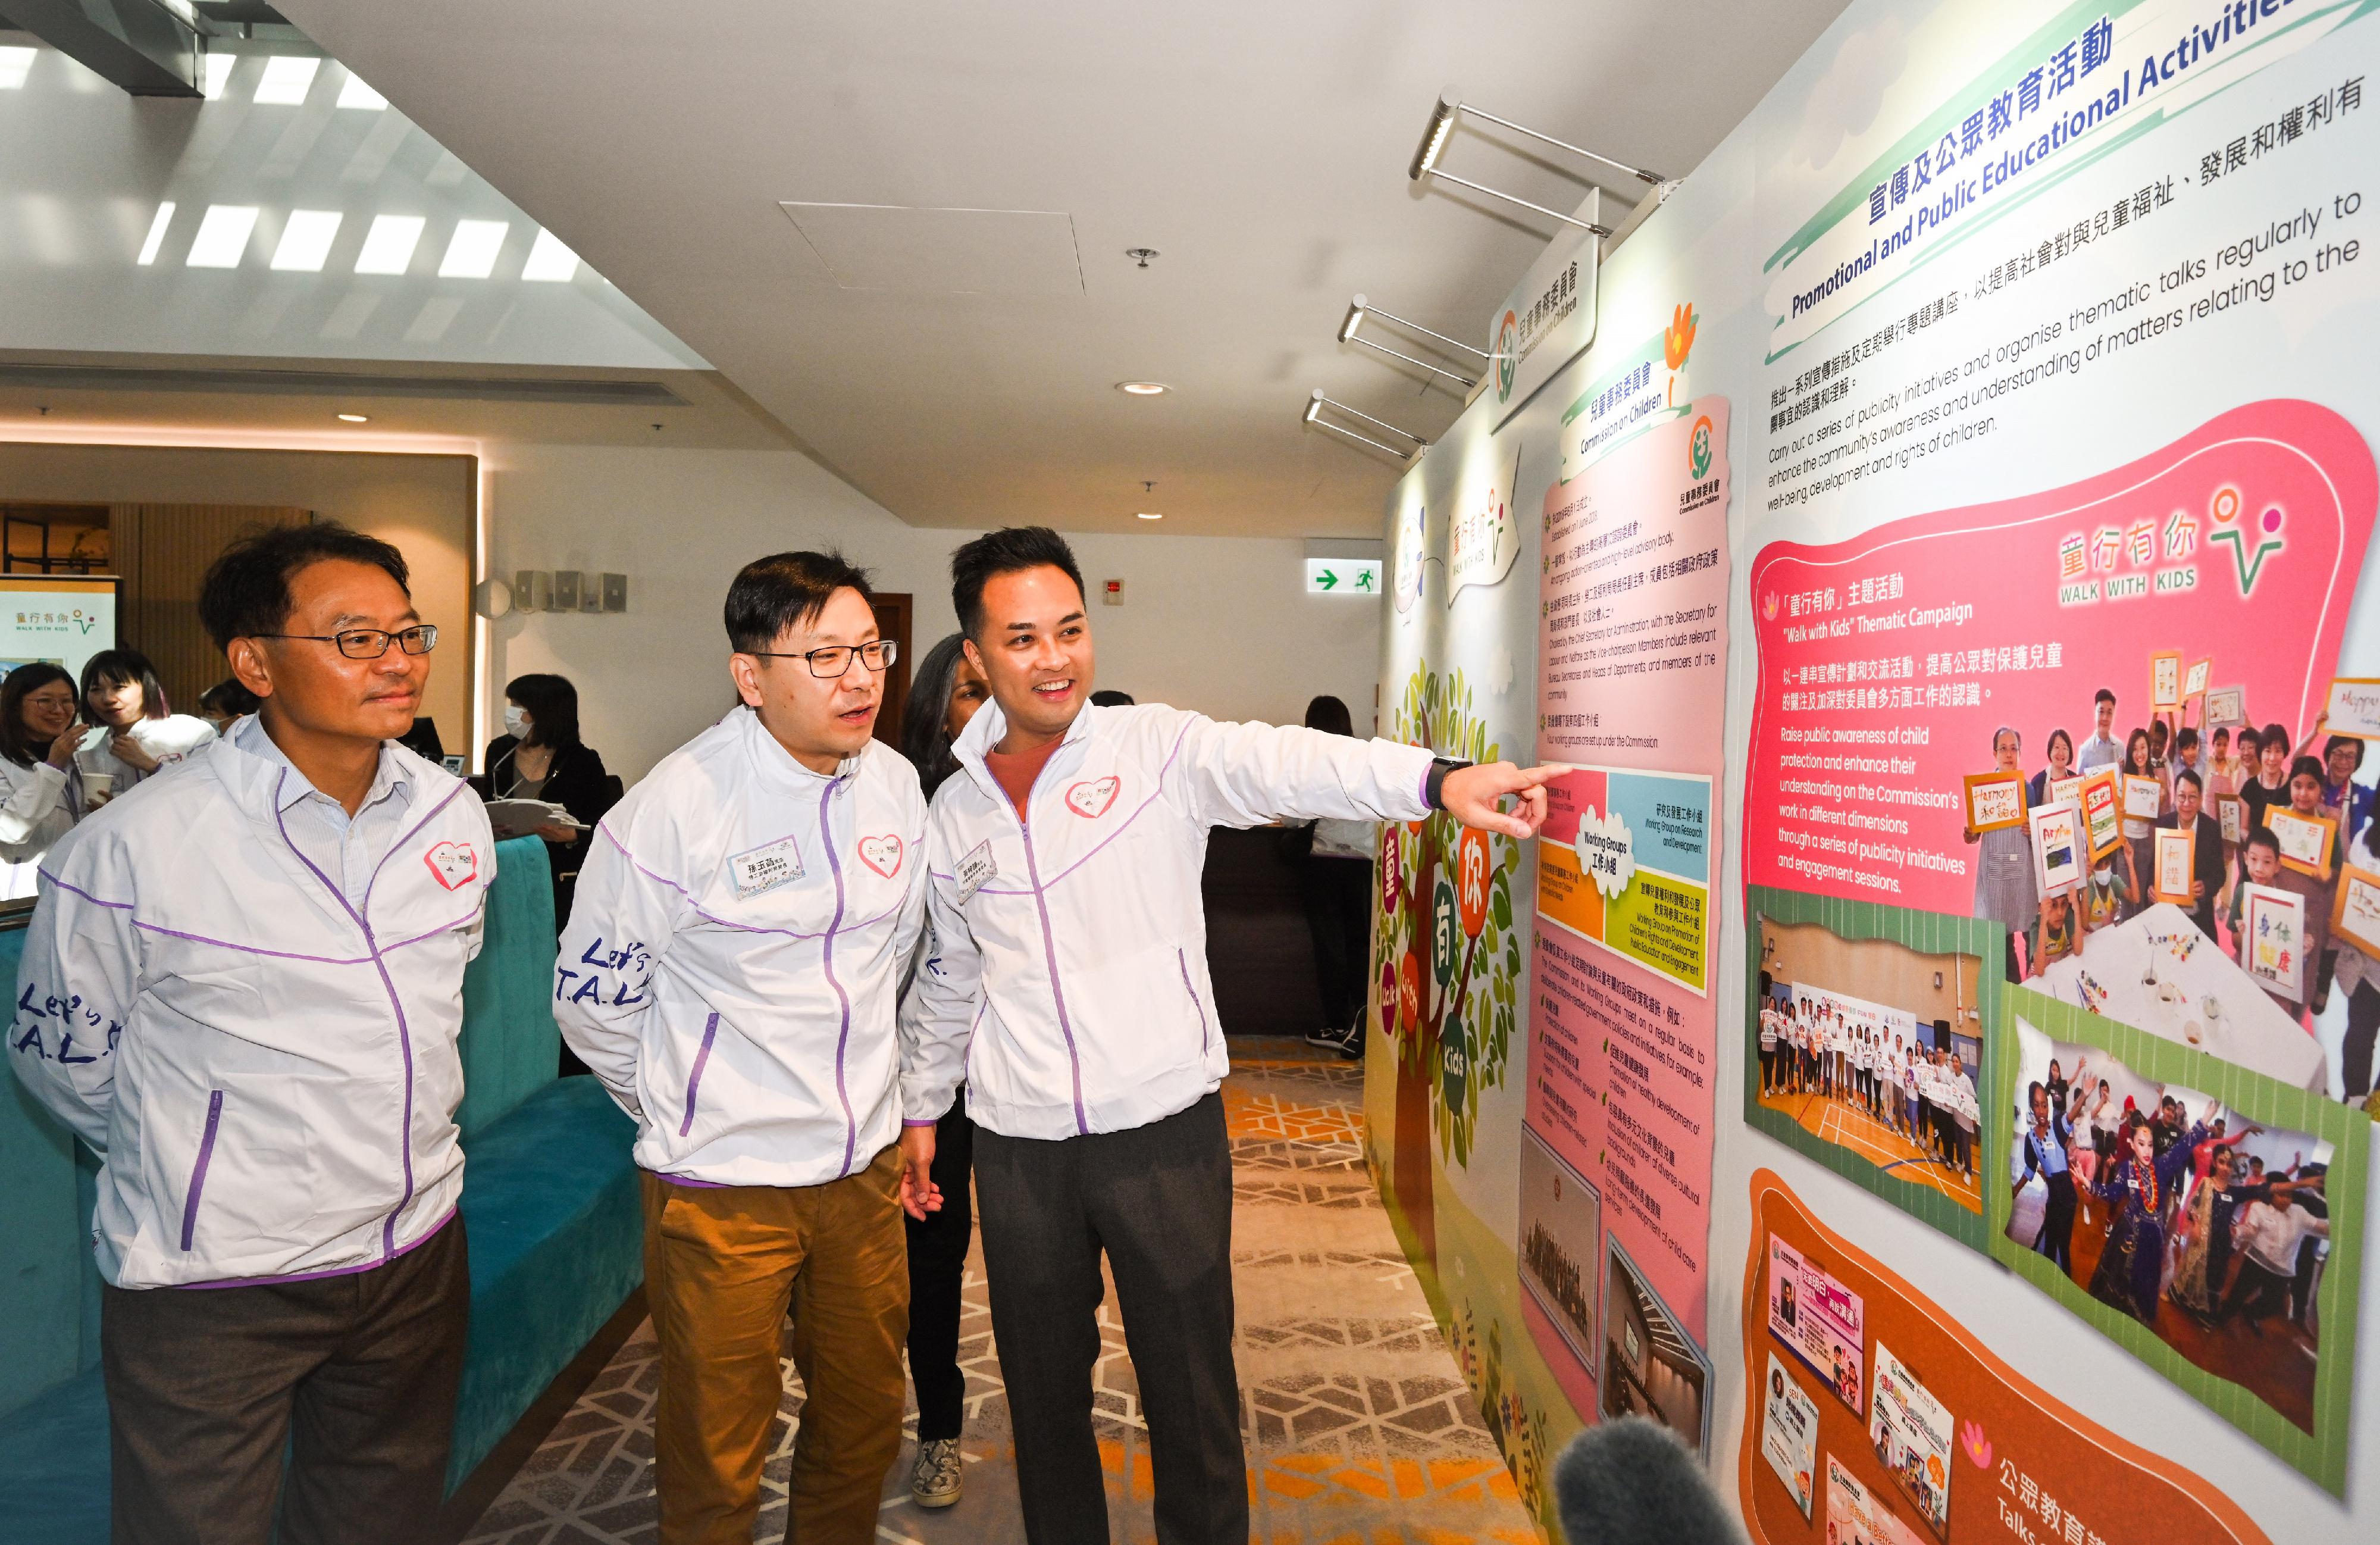 The Chief Secretary for Administration and Chairperson of the Commission on Children (CoC), Mr Chan Kwok-ki, today (November 18) hosted the CoC's "Walk with Kids" stakeholder engagement event. Photo shows the Secretary for Labour and Welfare, Mr Chris Sun (centre), touring the exhibition, which reviewed the CoC's work since its establishment in June 2018.